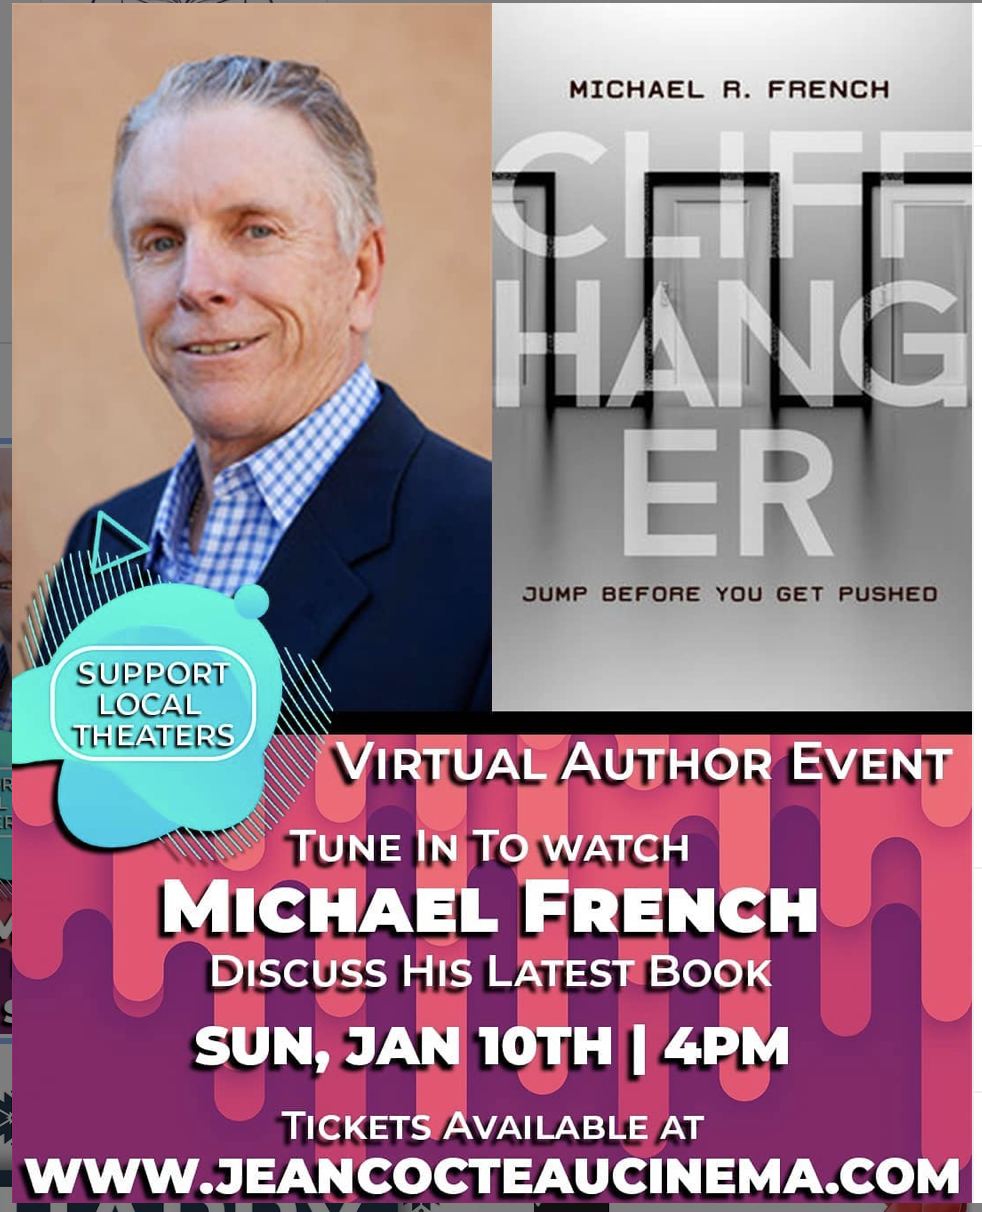 Michael R. French Book Reading